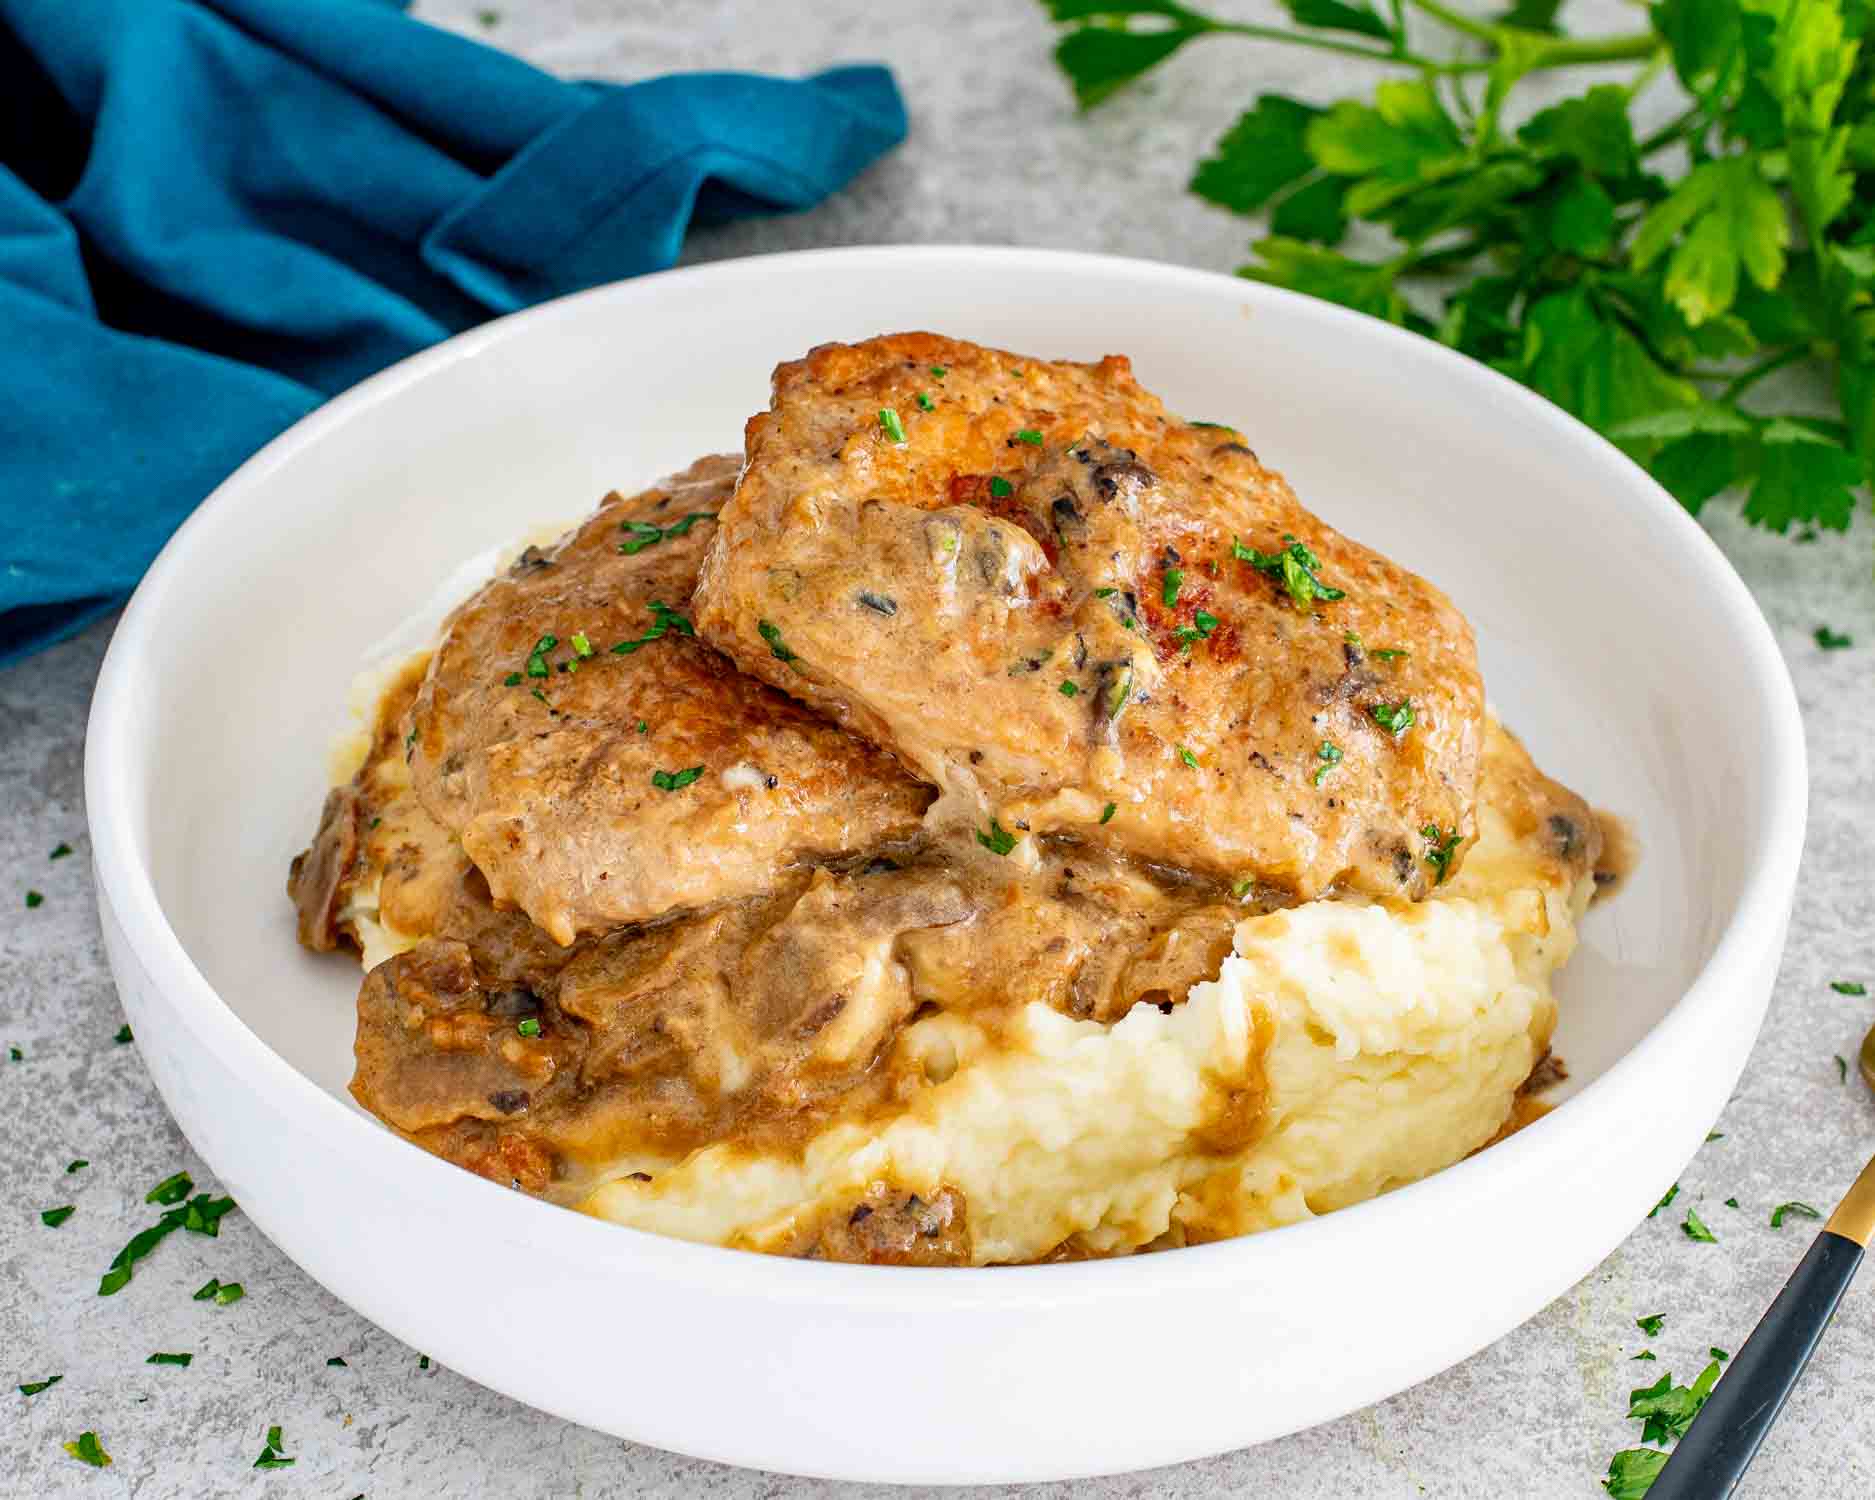 2 pork chops with mushroom gravy made in the slow cooker on a bed of mashed potatoes on a white plate.